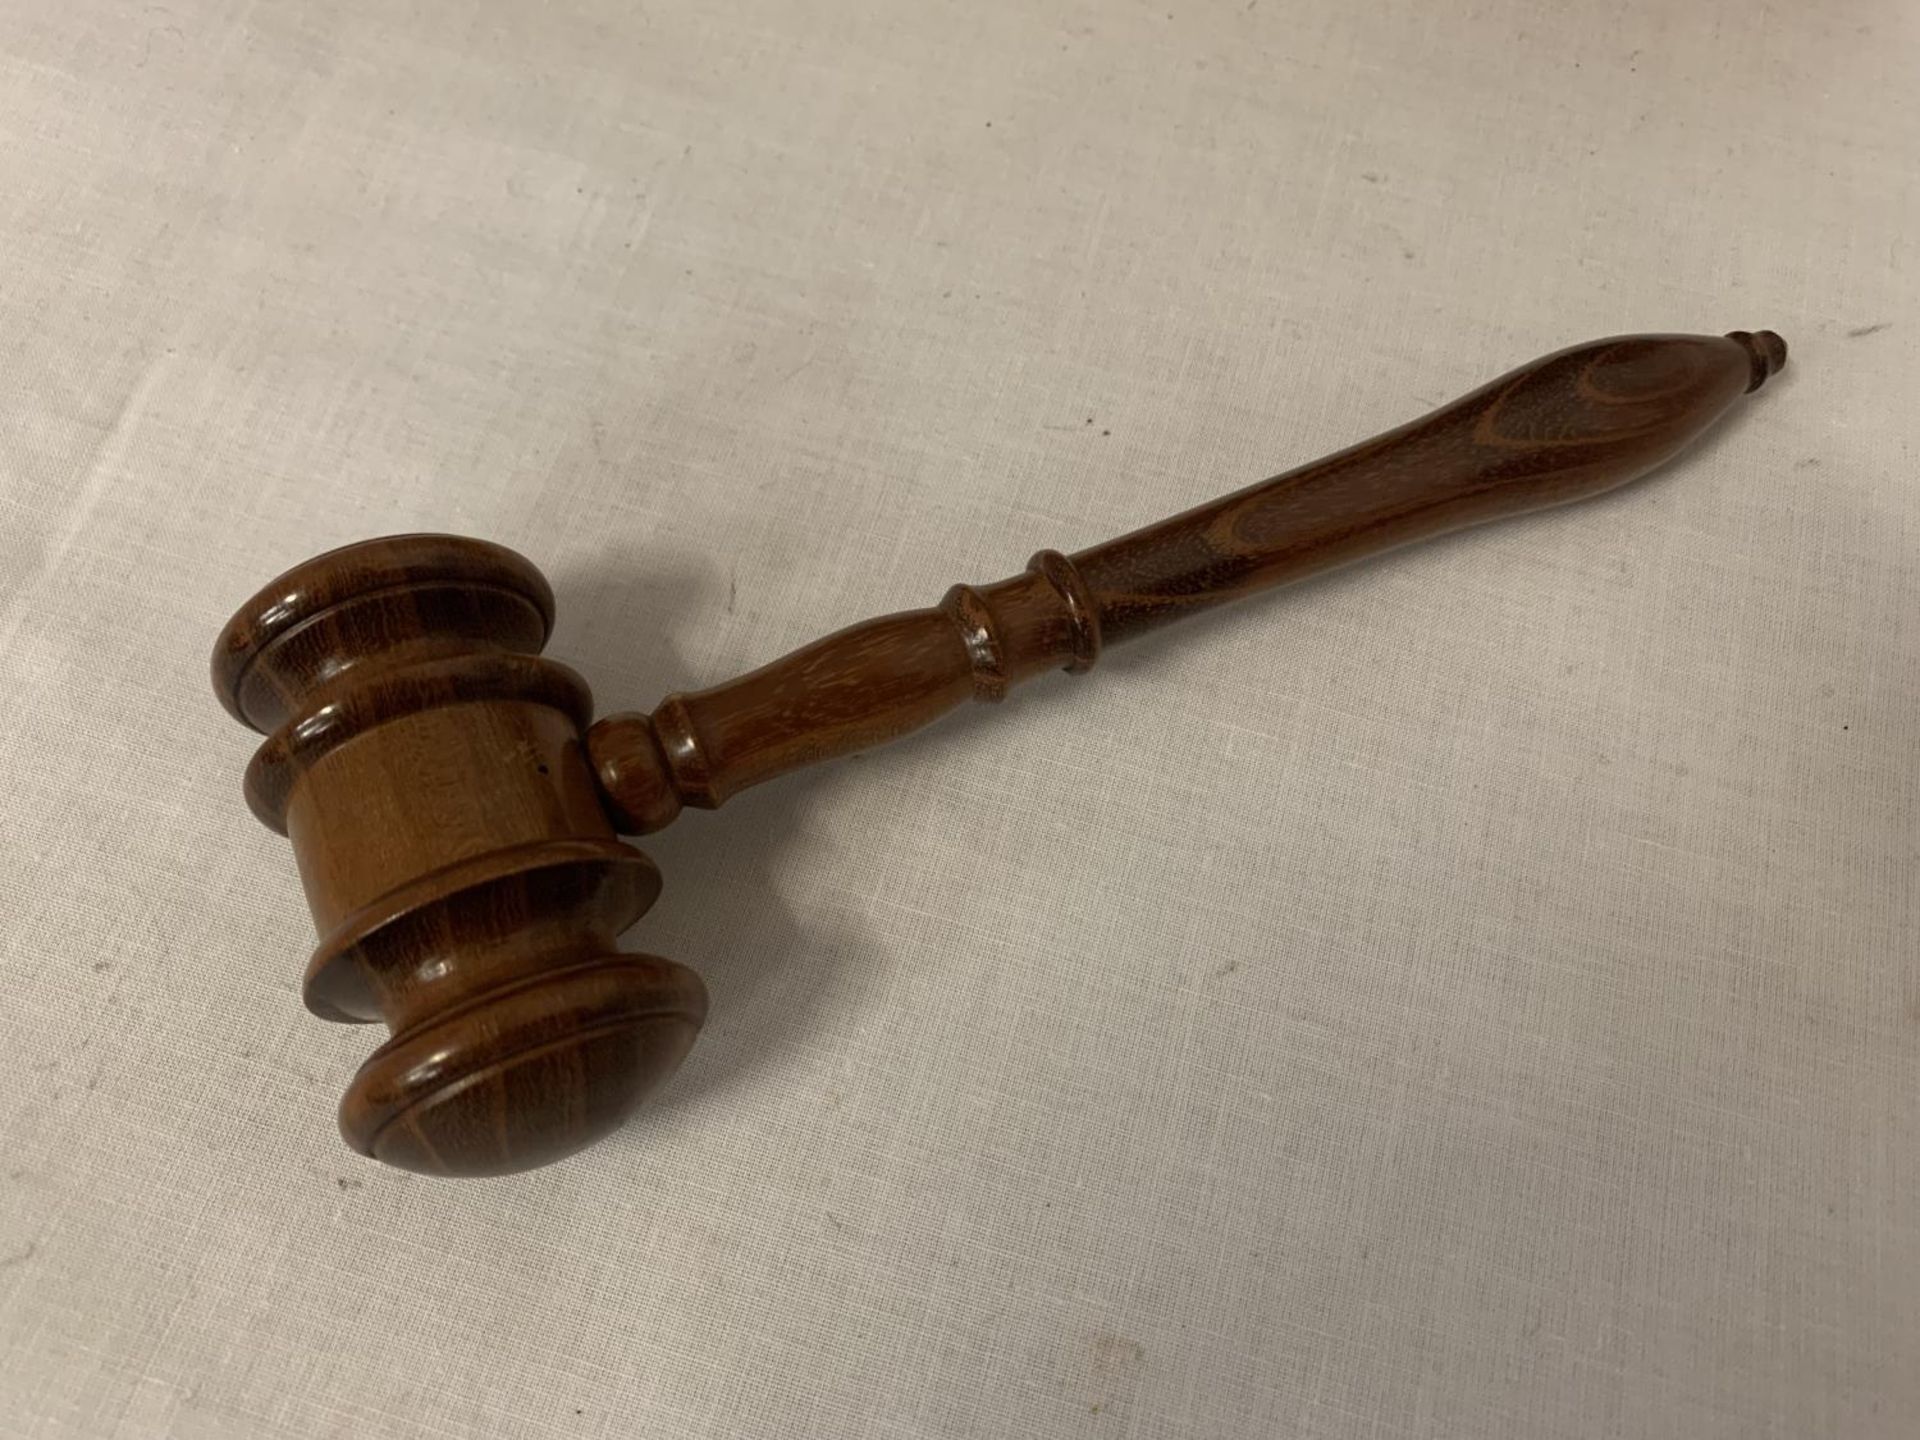 A VINTAGE YEW WOOD AUCTIONEERS GAVEL IN ORIGINAL ?LONG LIFE? JEWEL OF GAVELS BOX - Image 2 of 4